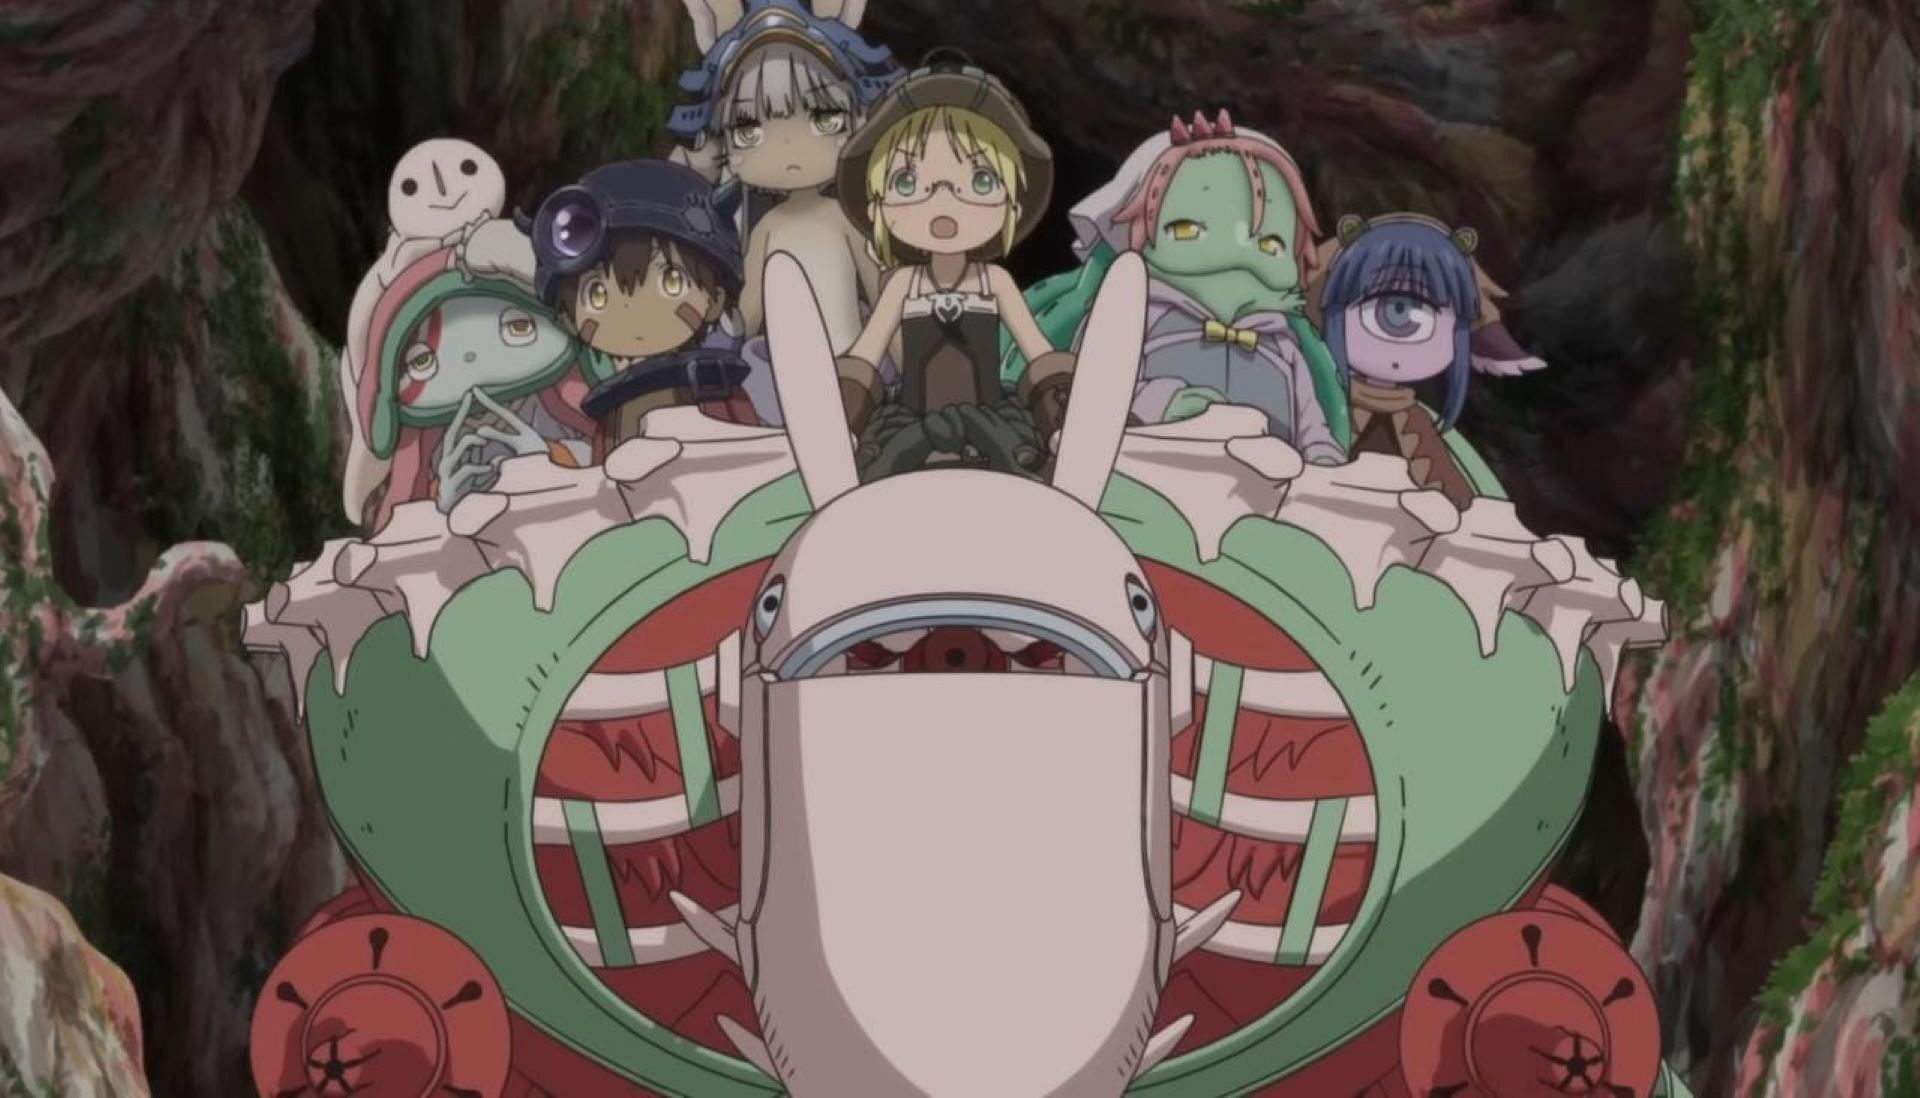 Made In Abyss Season 3 - Everything You Need to Know - In Transit Broadway